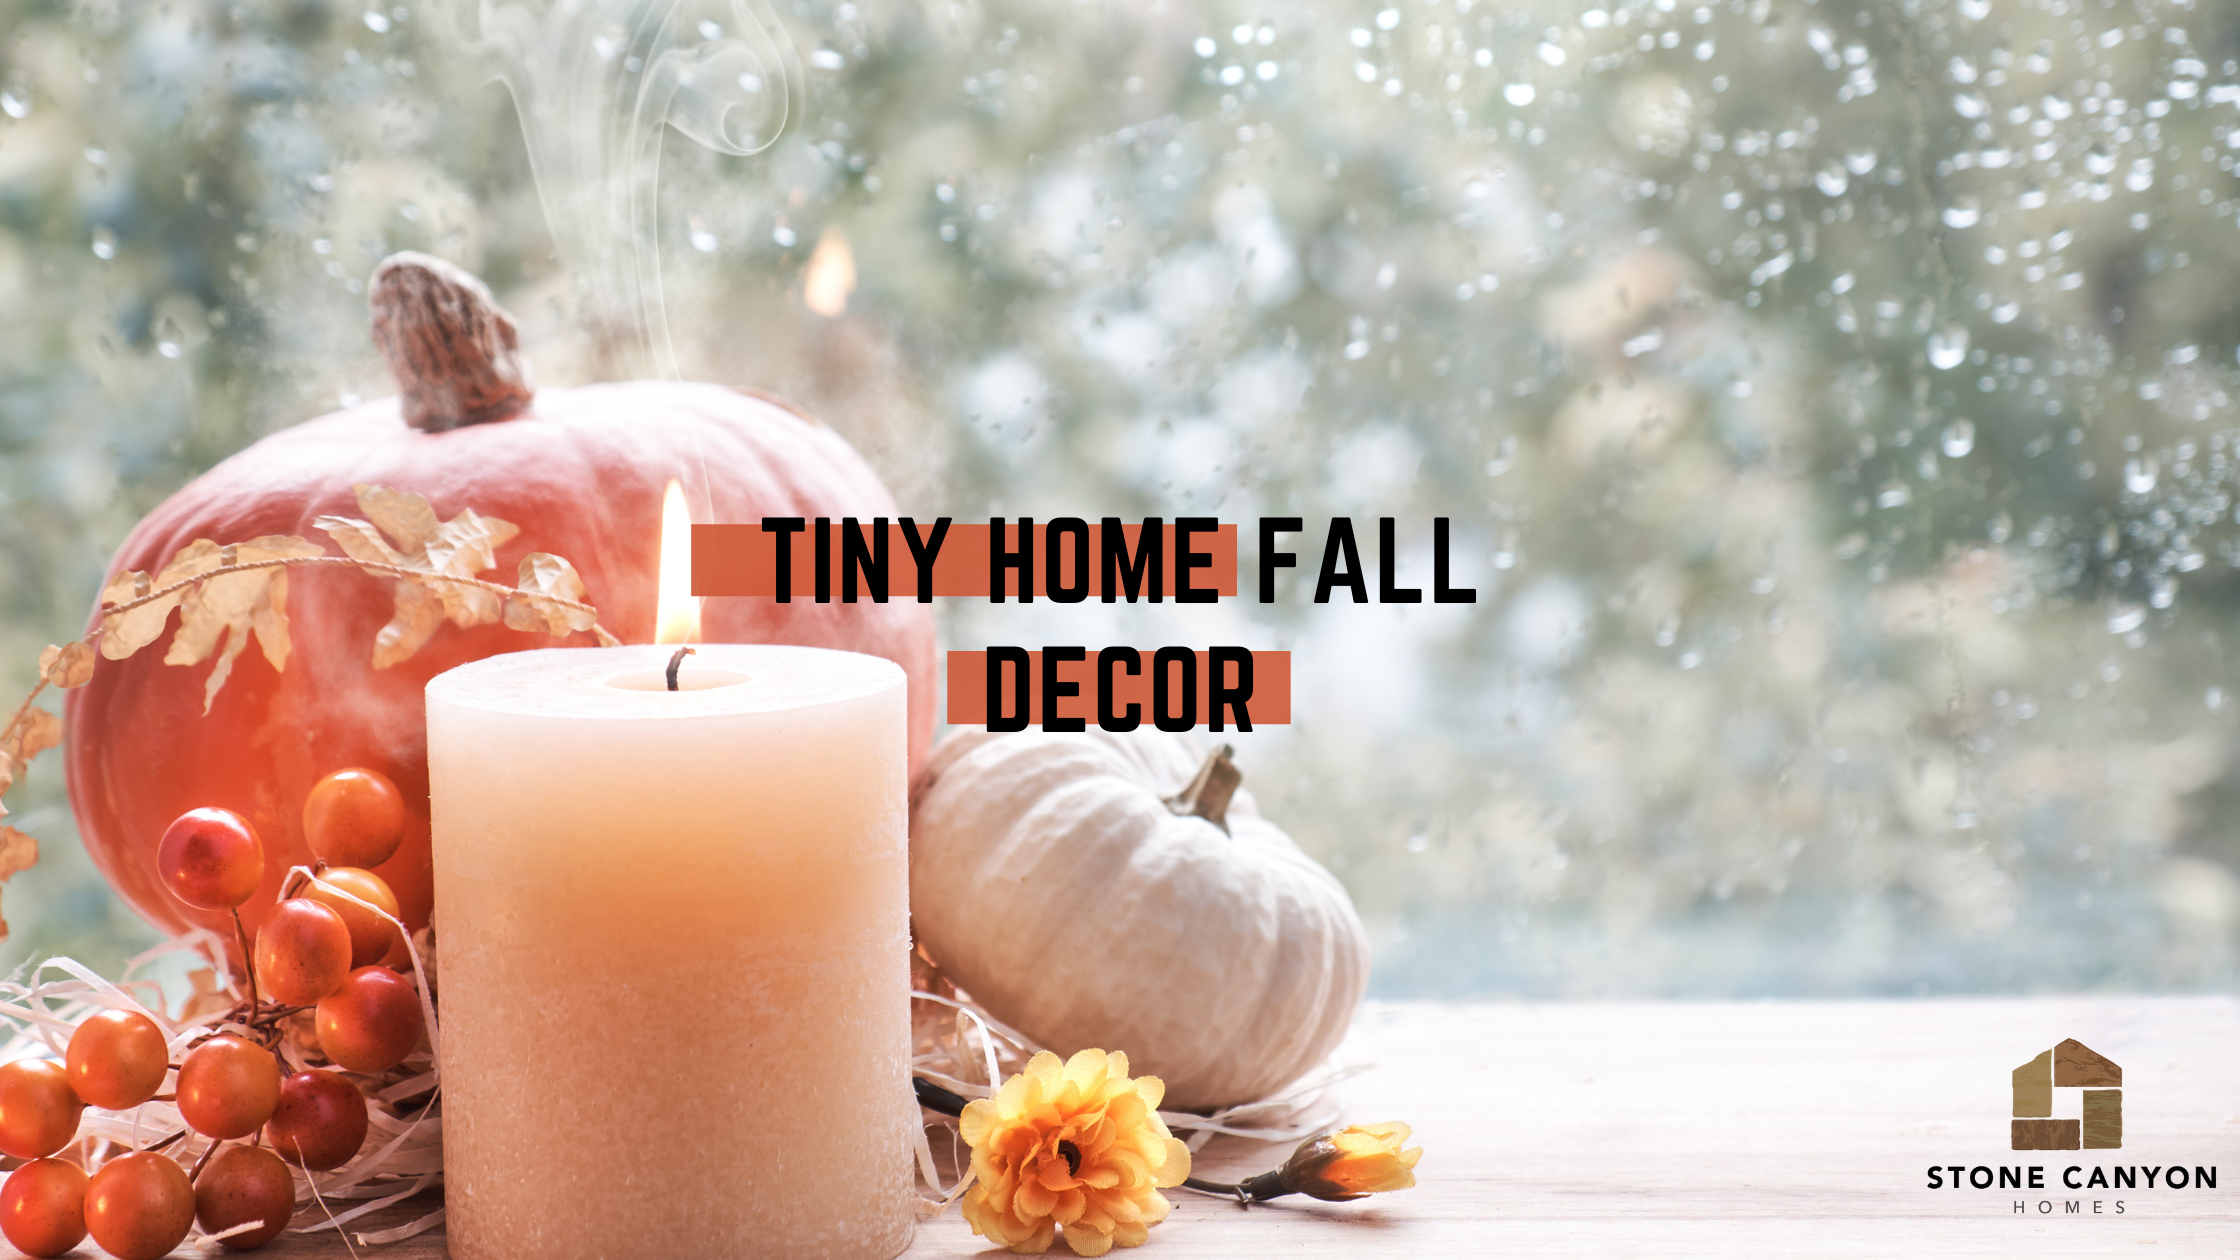 Tiny Home Fall Decor: Your Guide To Decorating